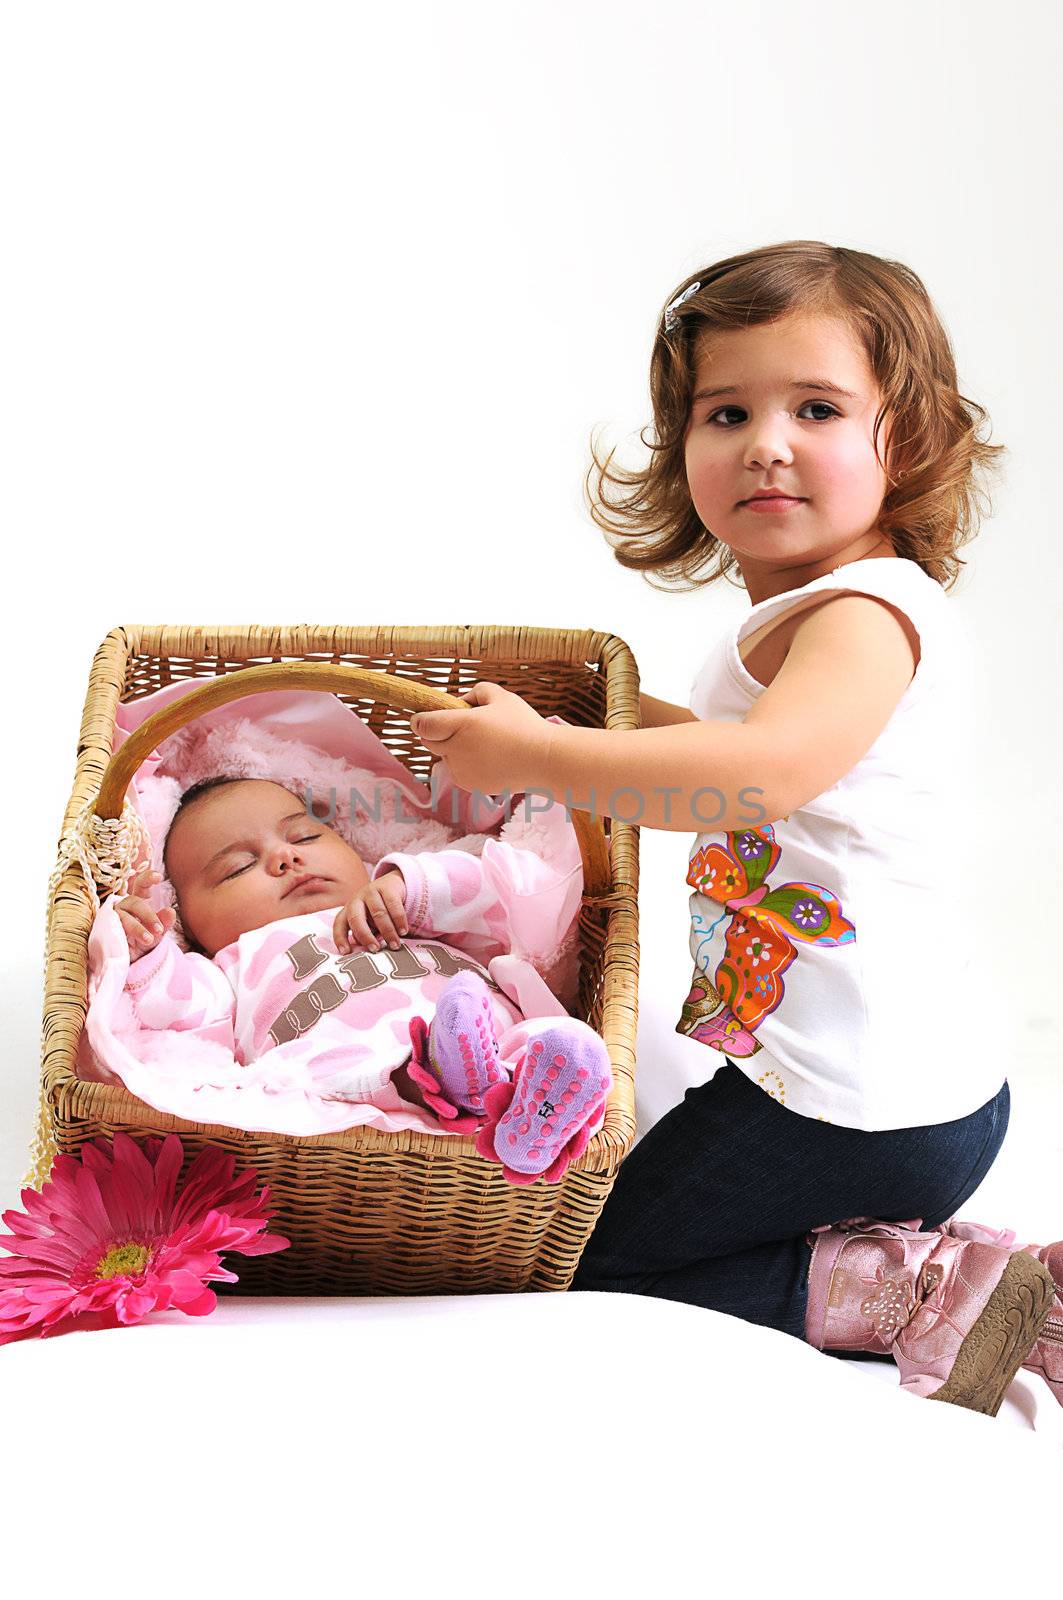 two sisters playing and smiling with baby in a basket with pink flower